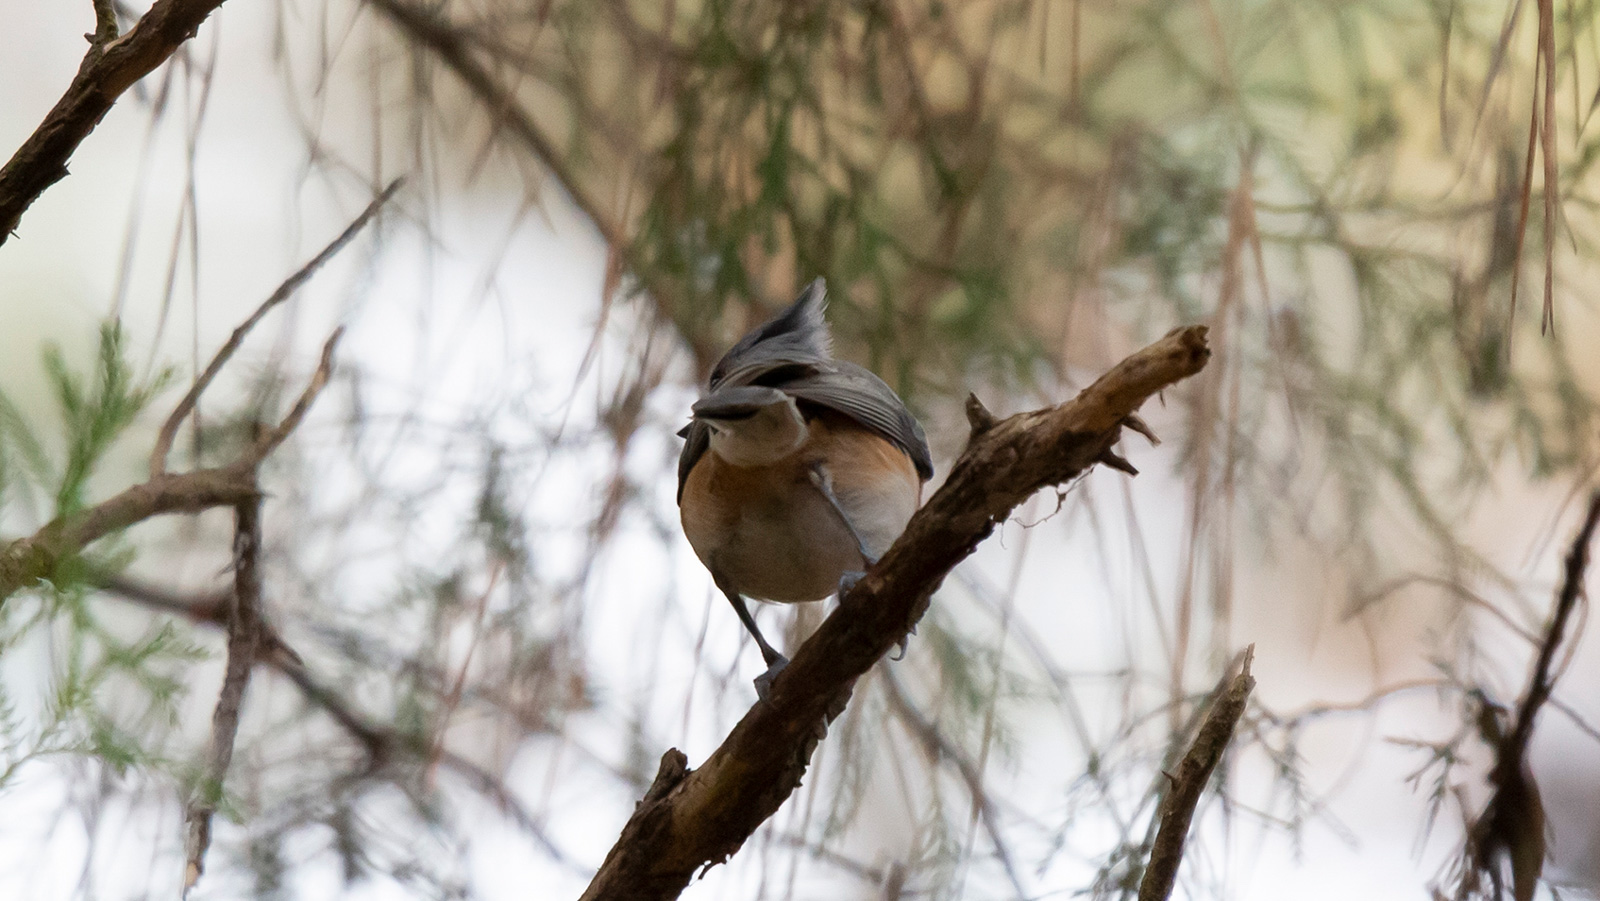 Tufted titmouse looking out from its perch on a branch